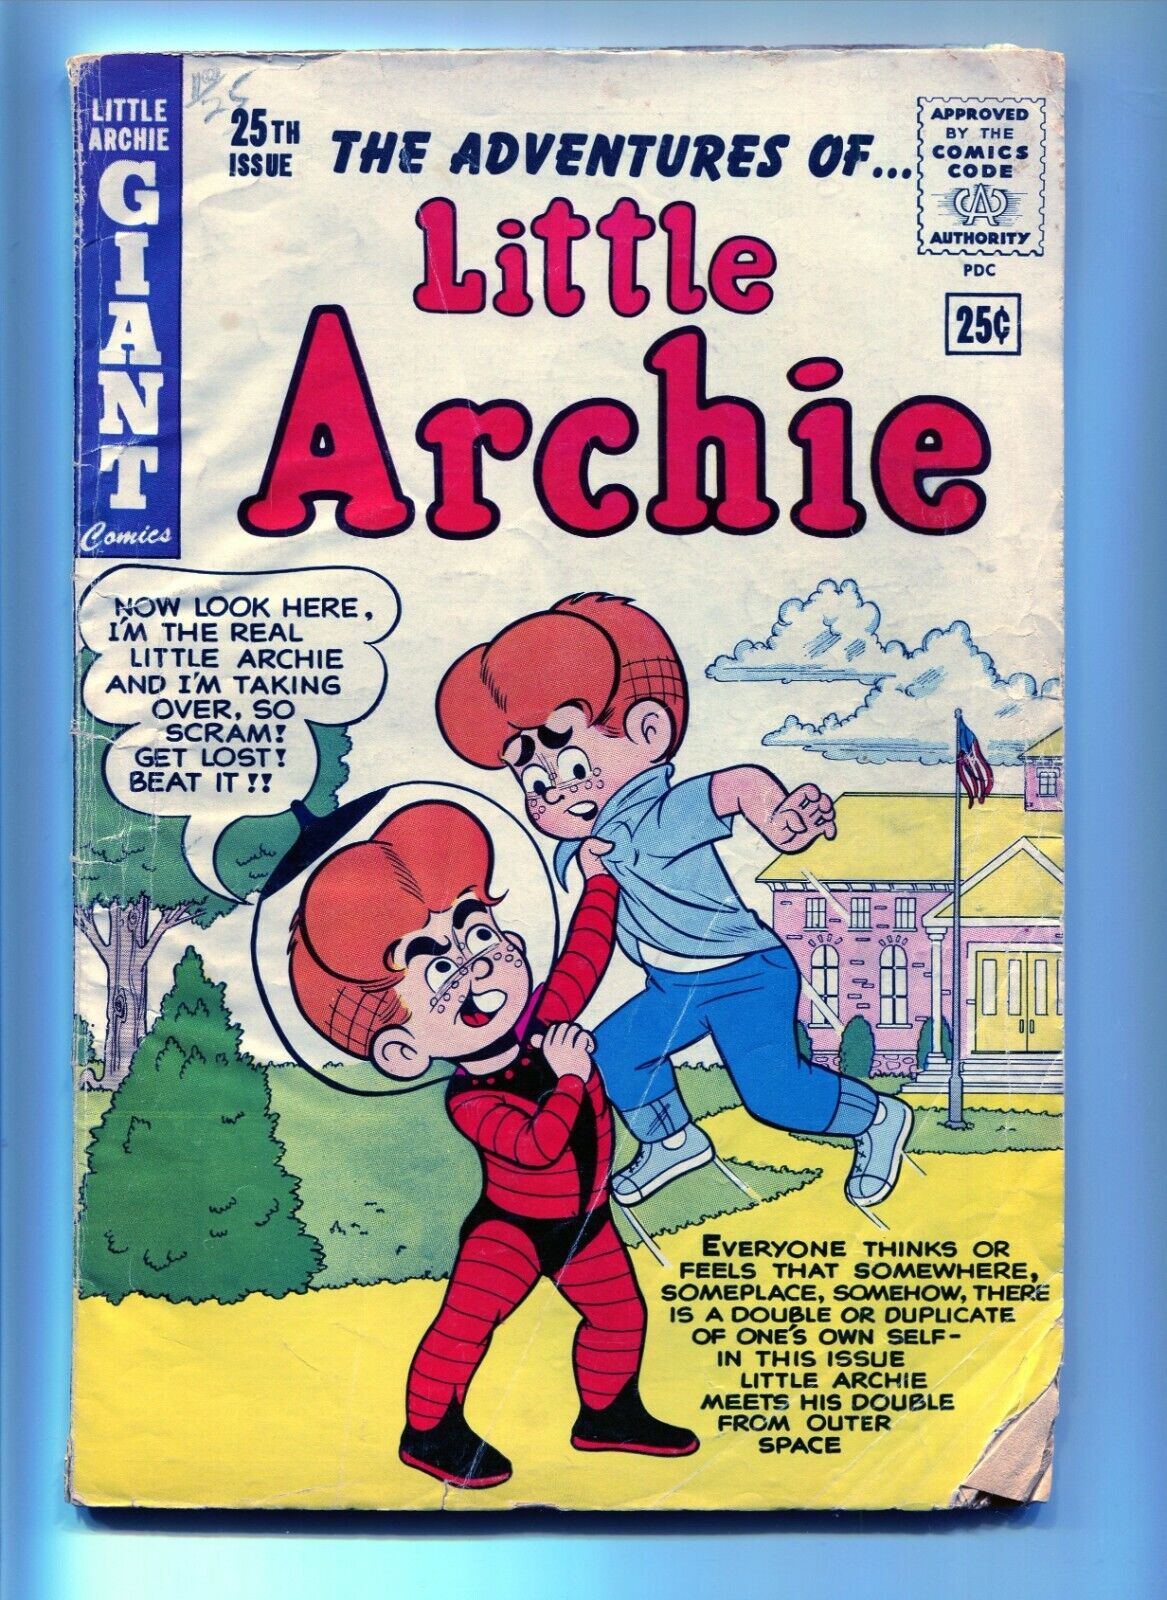 The Adventures of Little Archie #25 - Archie Series, Winter 1962-63 $0.25 - VG